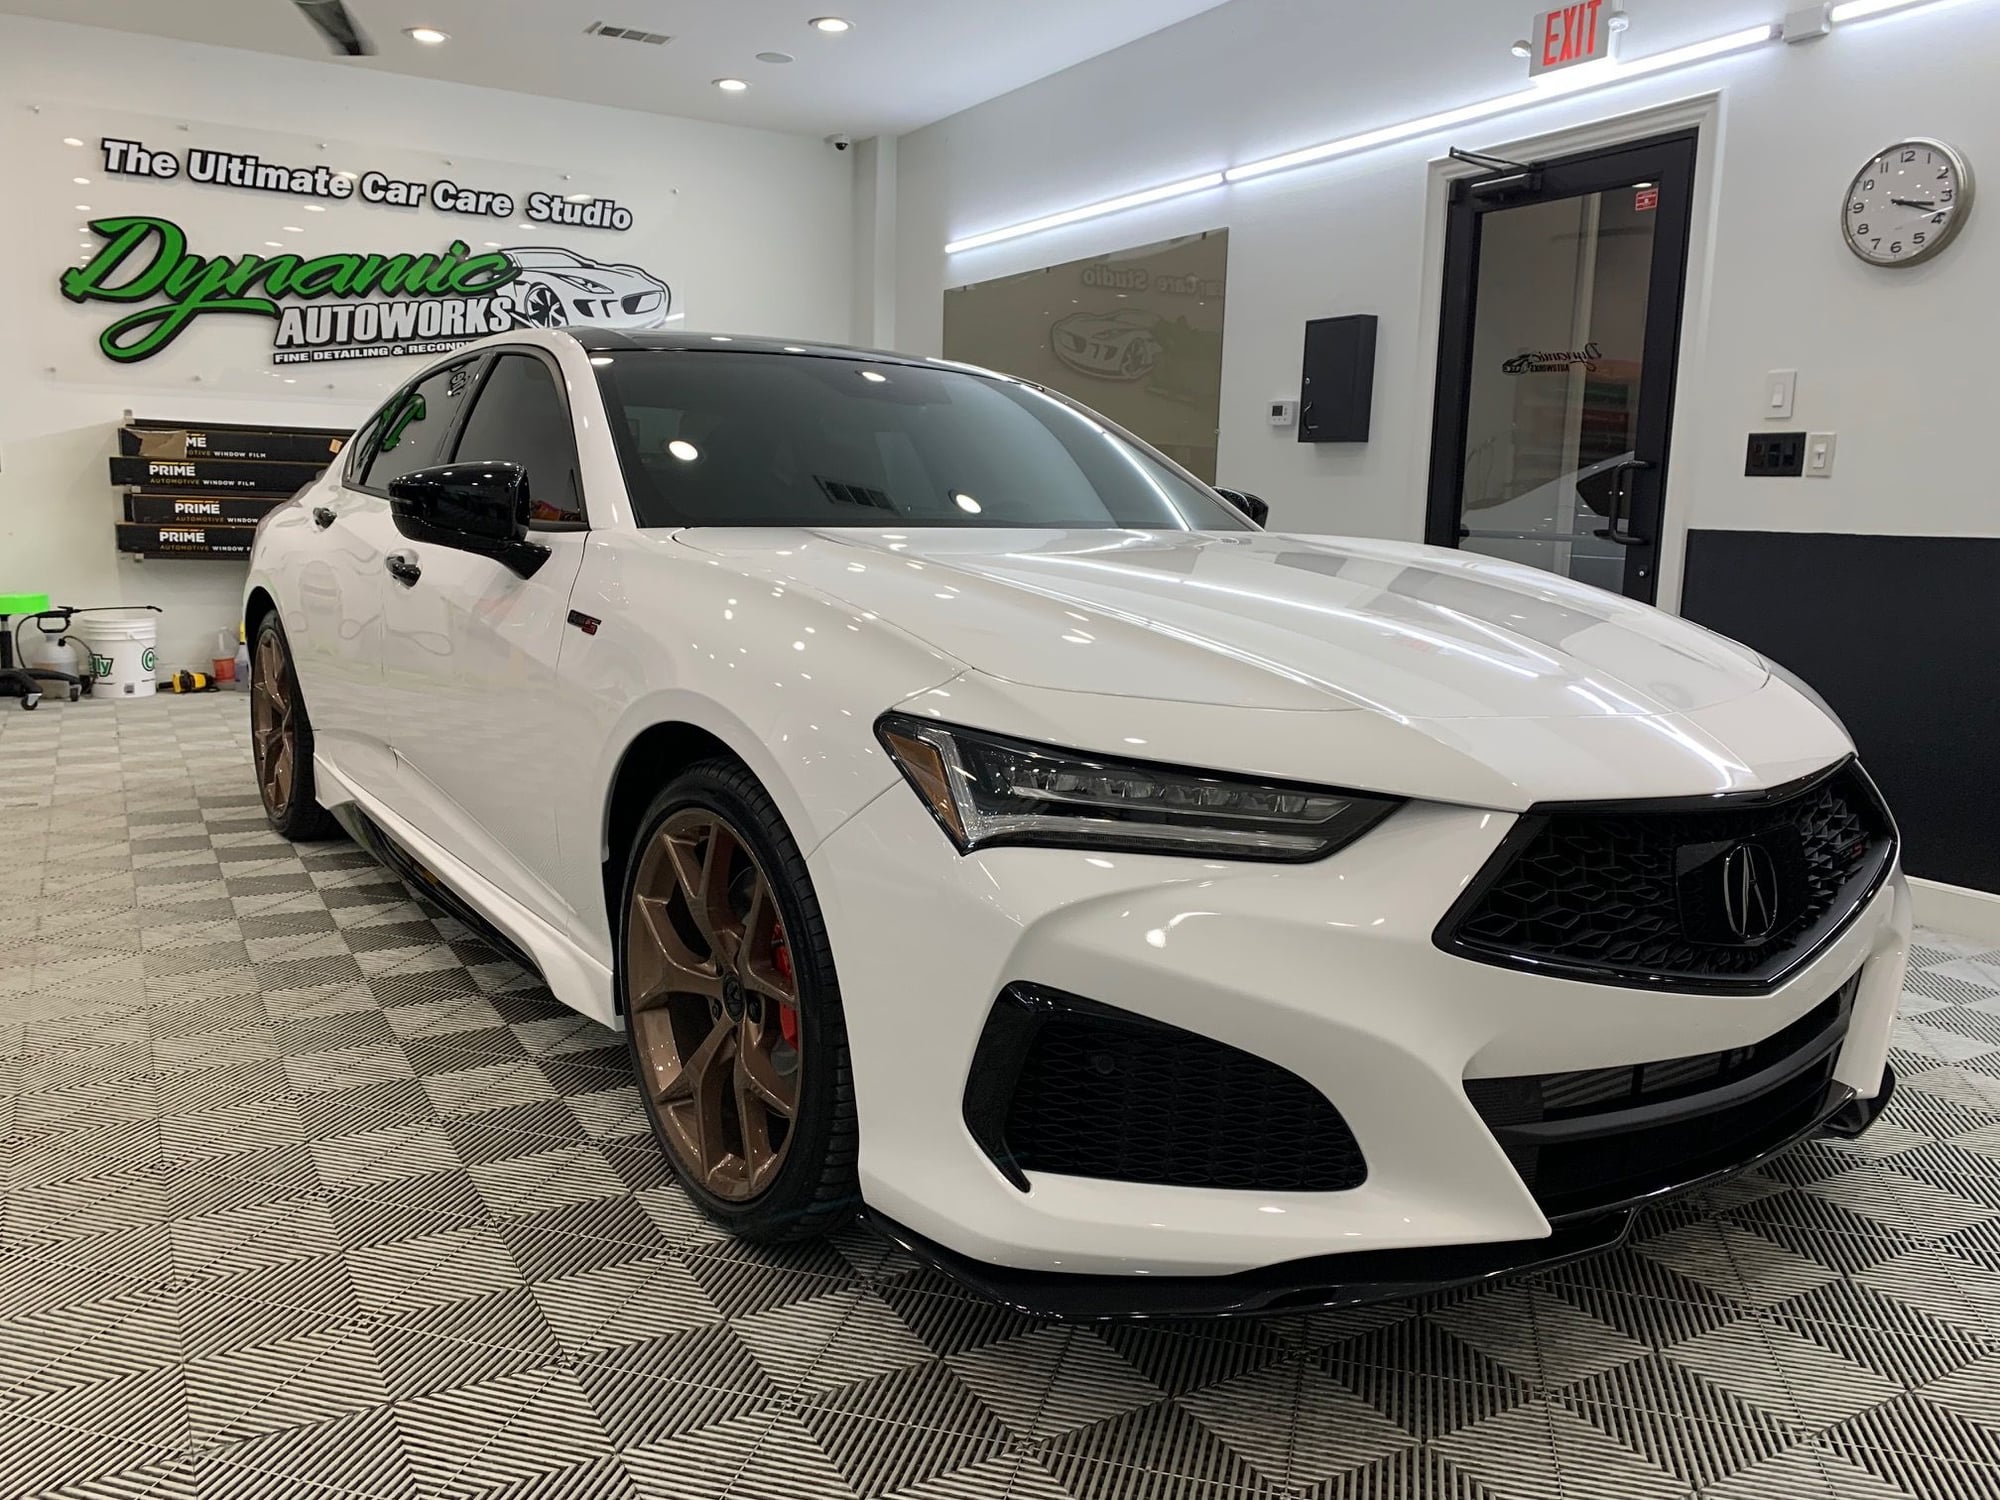 2023 Acura TLX - FS: Final 2023 PMC Edition TLX Type-S #100/100 in 130R White - New - VIN 19UUB7F05PY000200 - 1,396 Miles - 6 cyl - AWD - Automatic - Sedan - White - Houston, TX 77494, United States